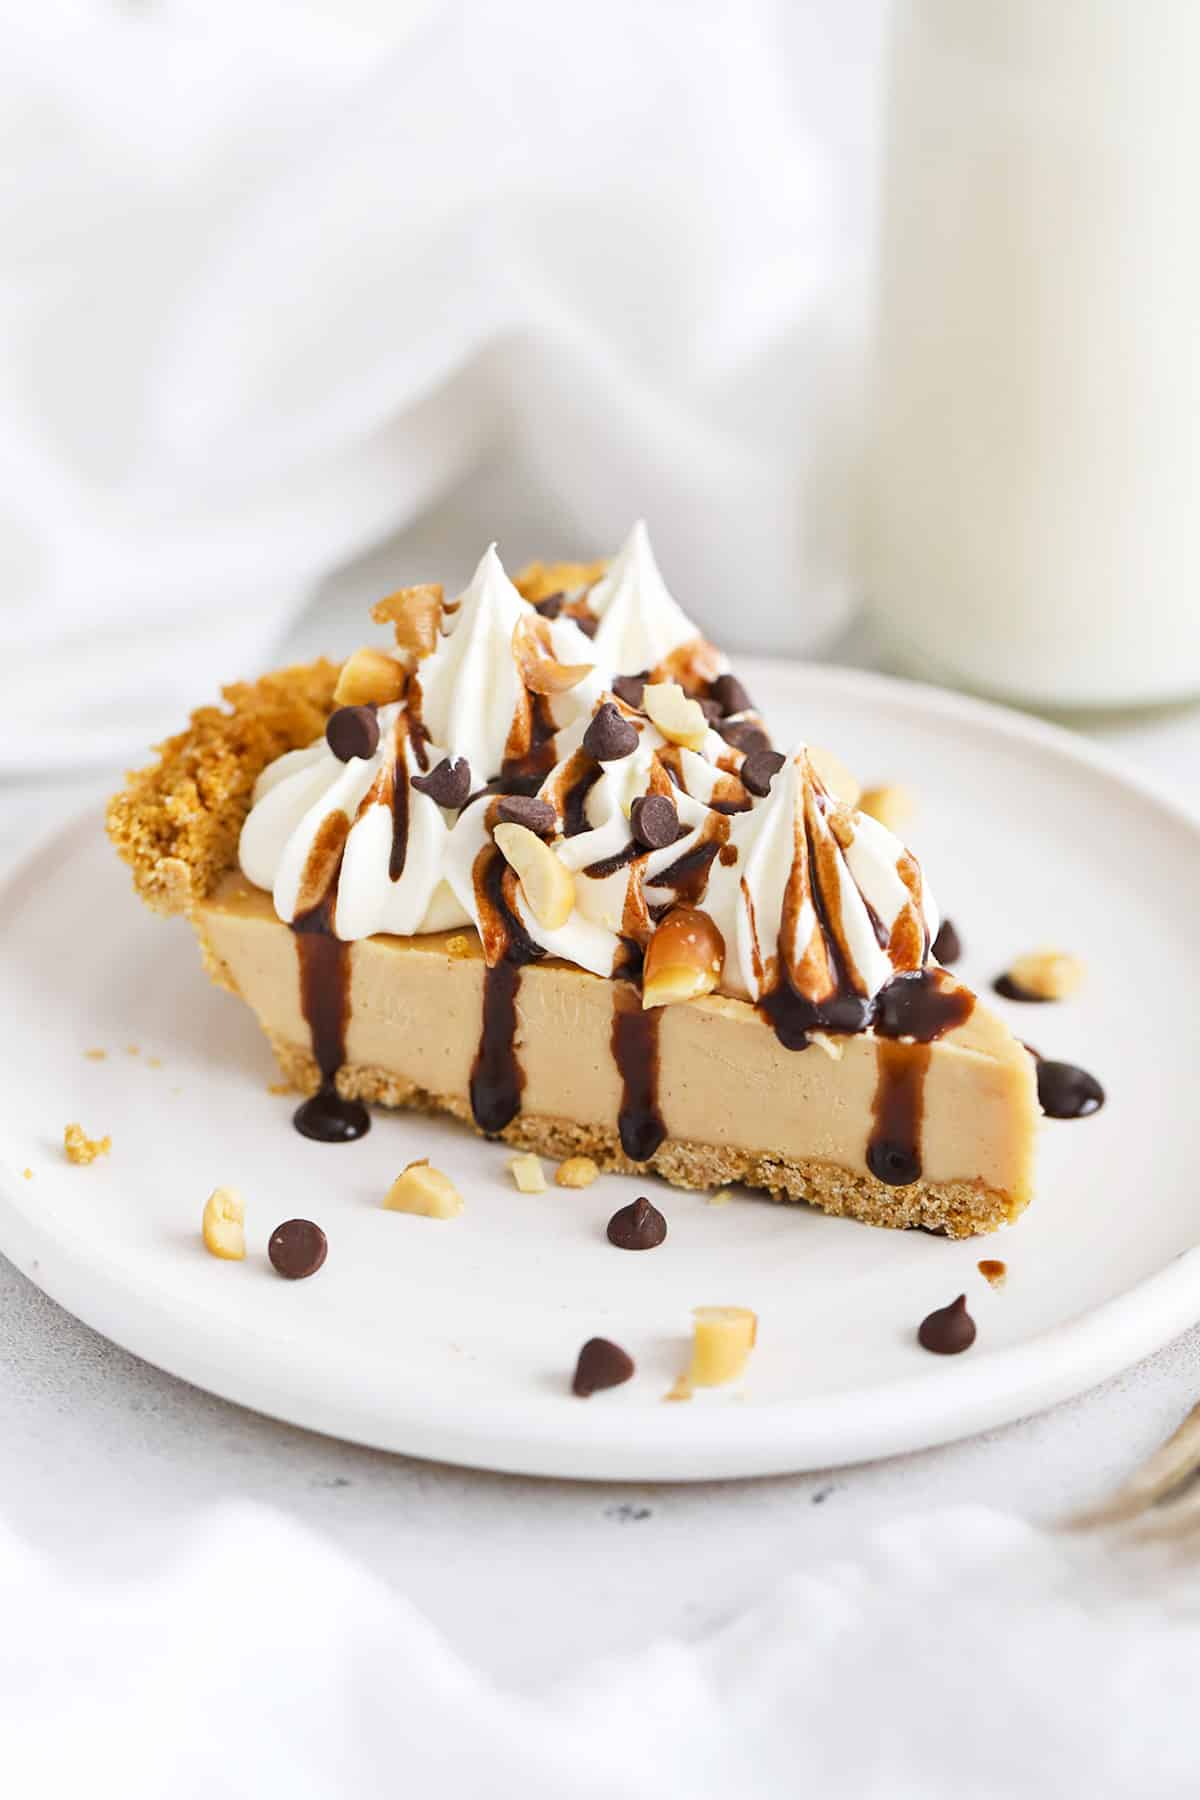 Front view of a slice of peanut butter pie with gluten-free graham cracker crust, whipped cream, and chocolate sauce